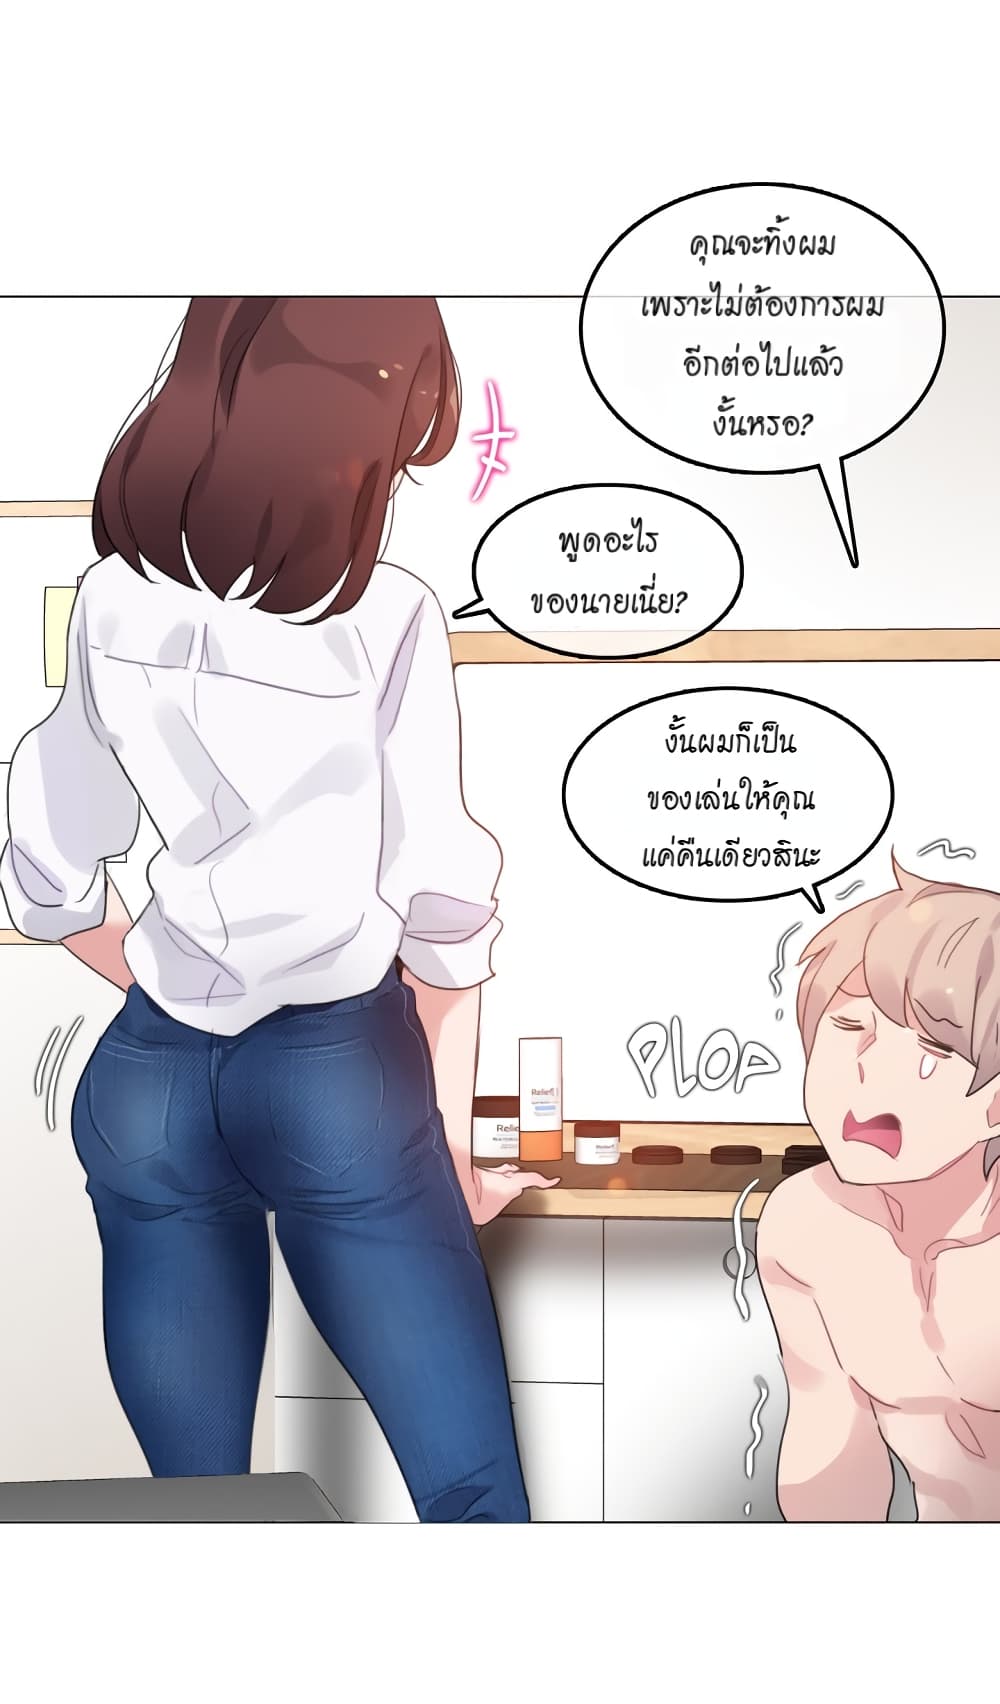 A Pervert's Daily Life 64-64